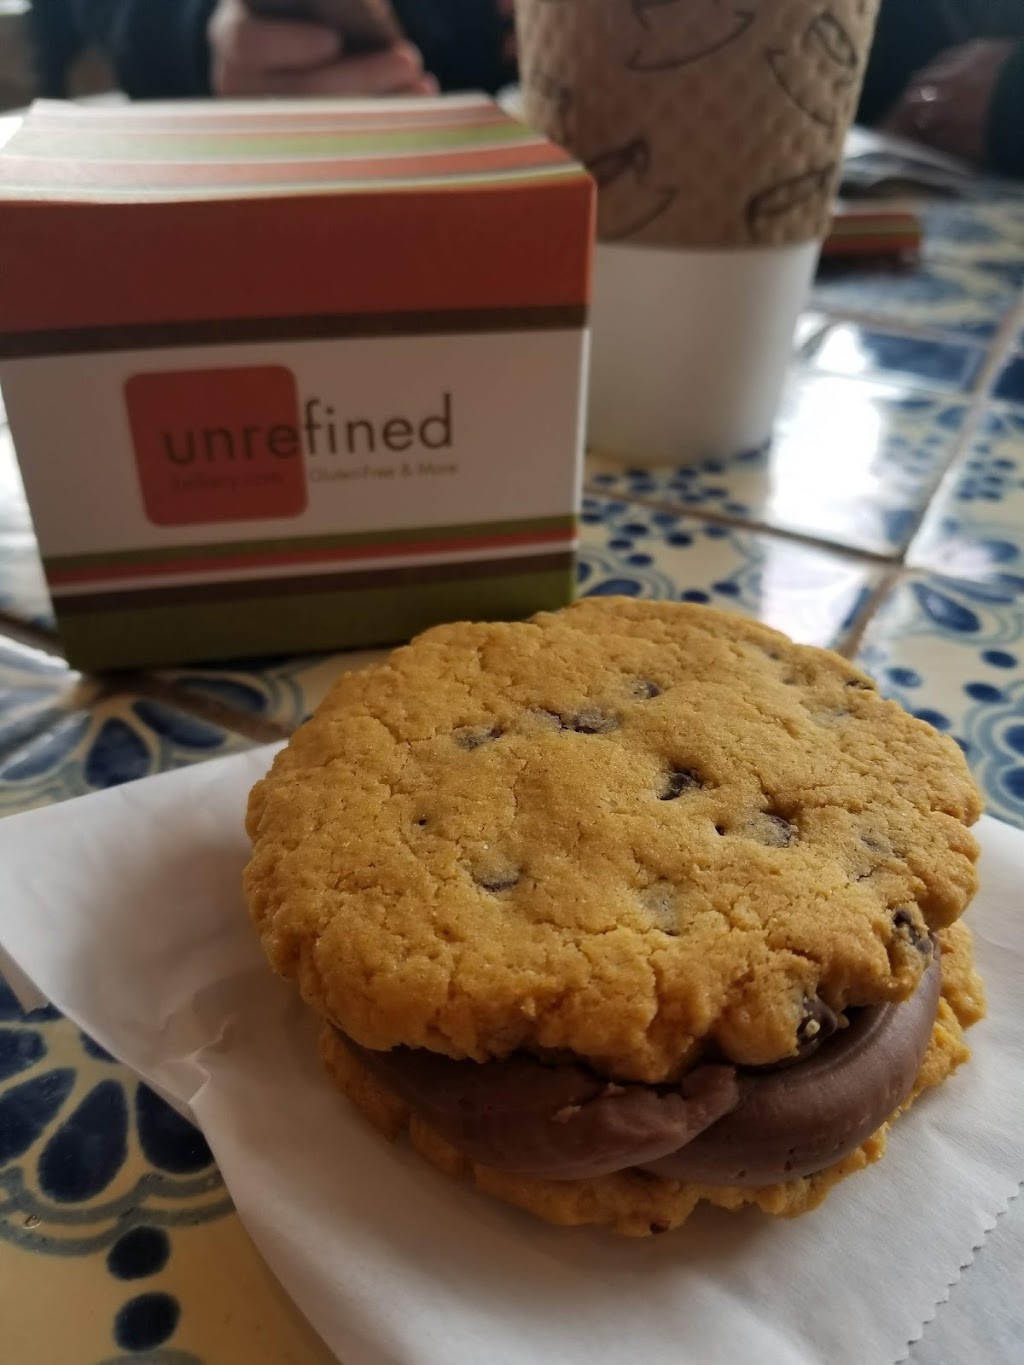 Unrefined Bakery | 6464 E NW Hwy Suite 326, Dallas, TX 75214 | Phone: (214) 414-2414